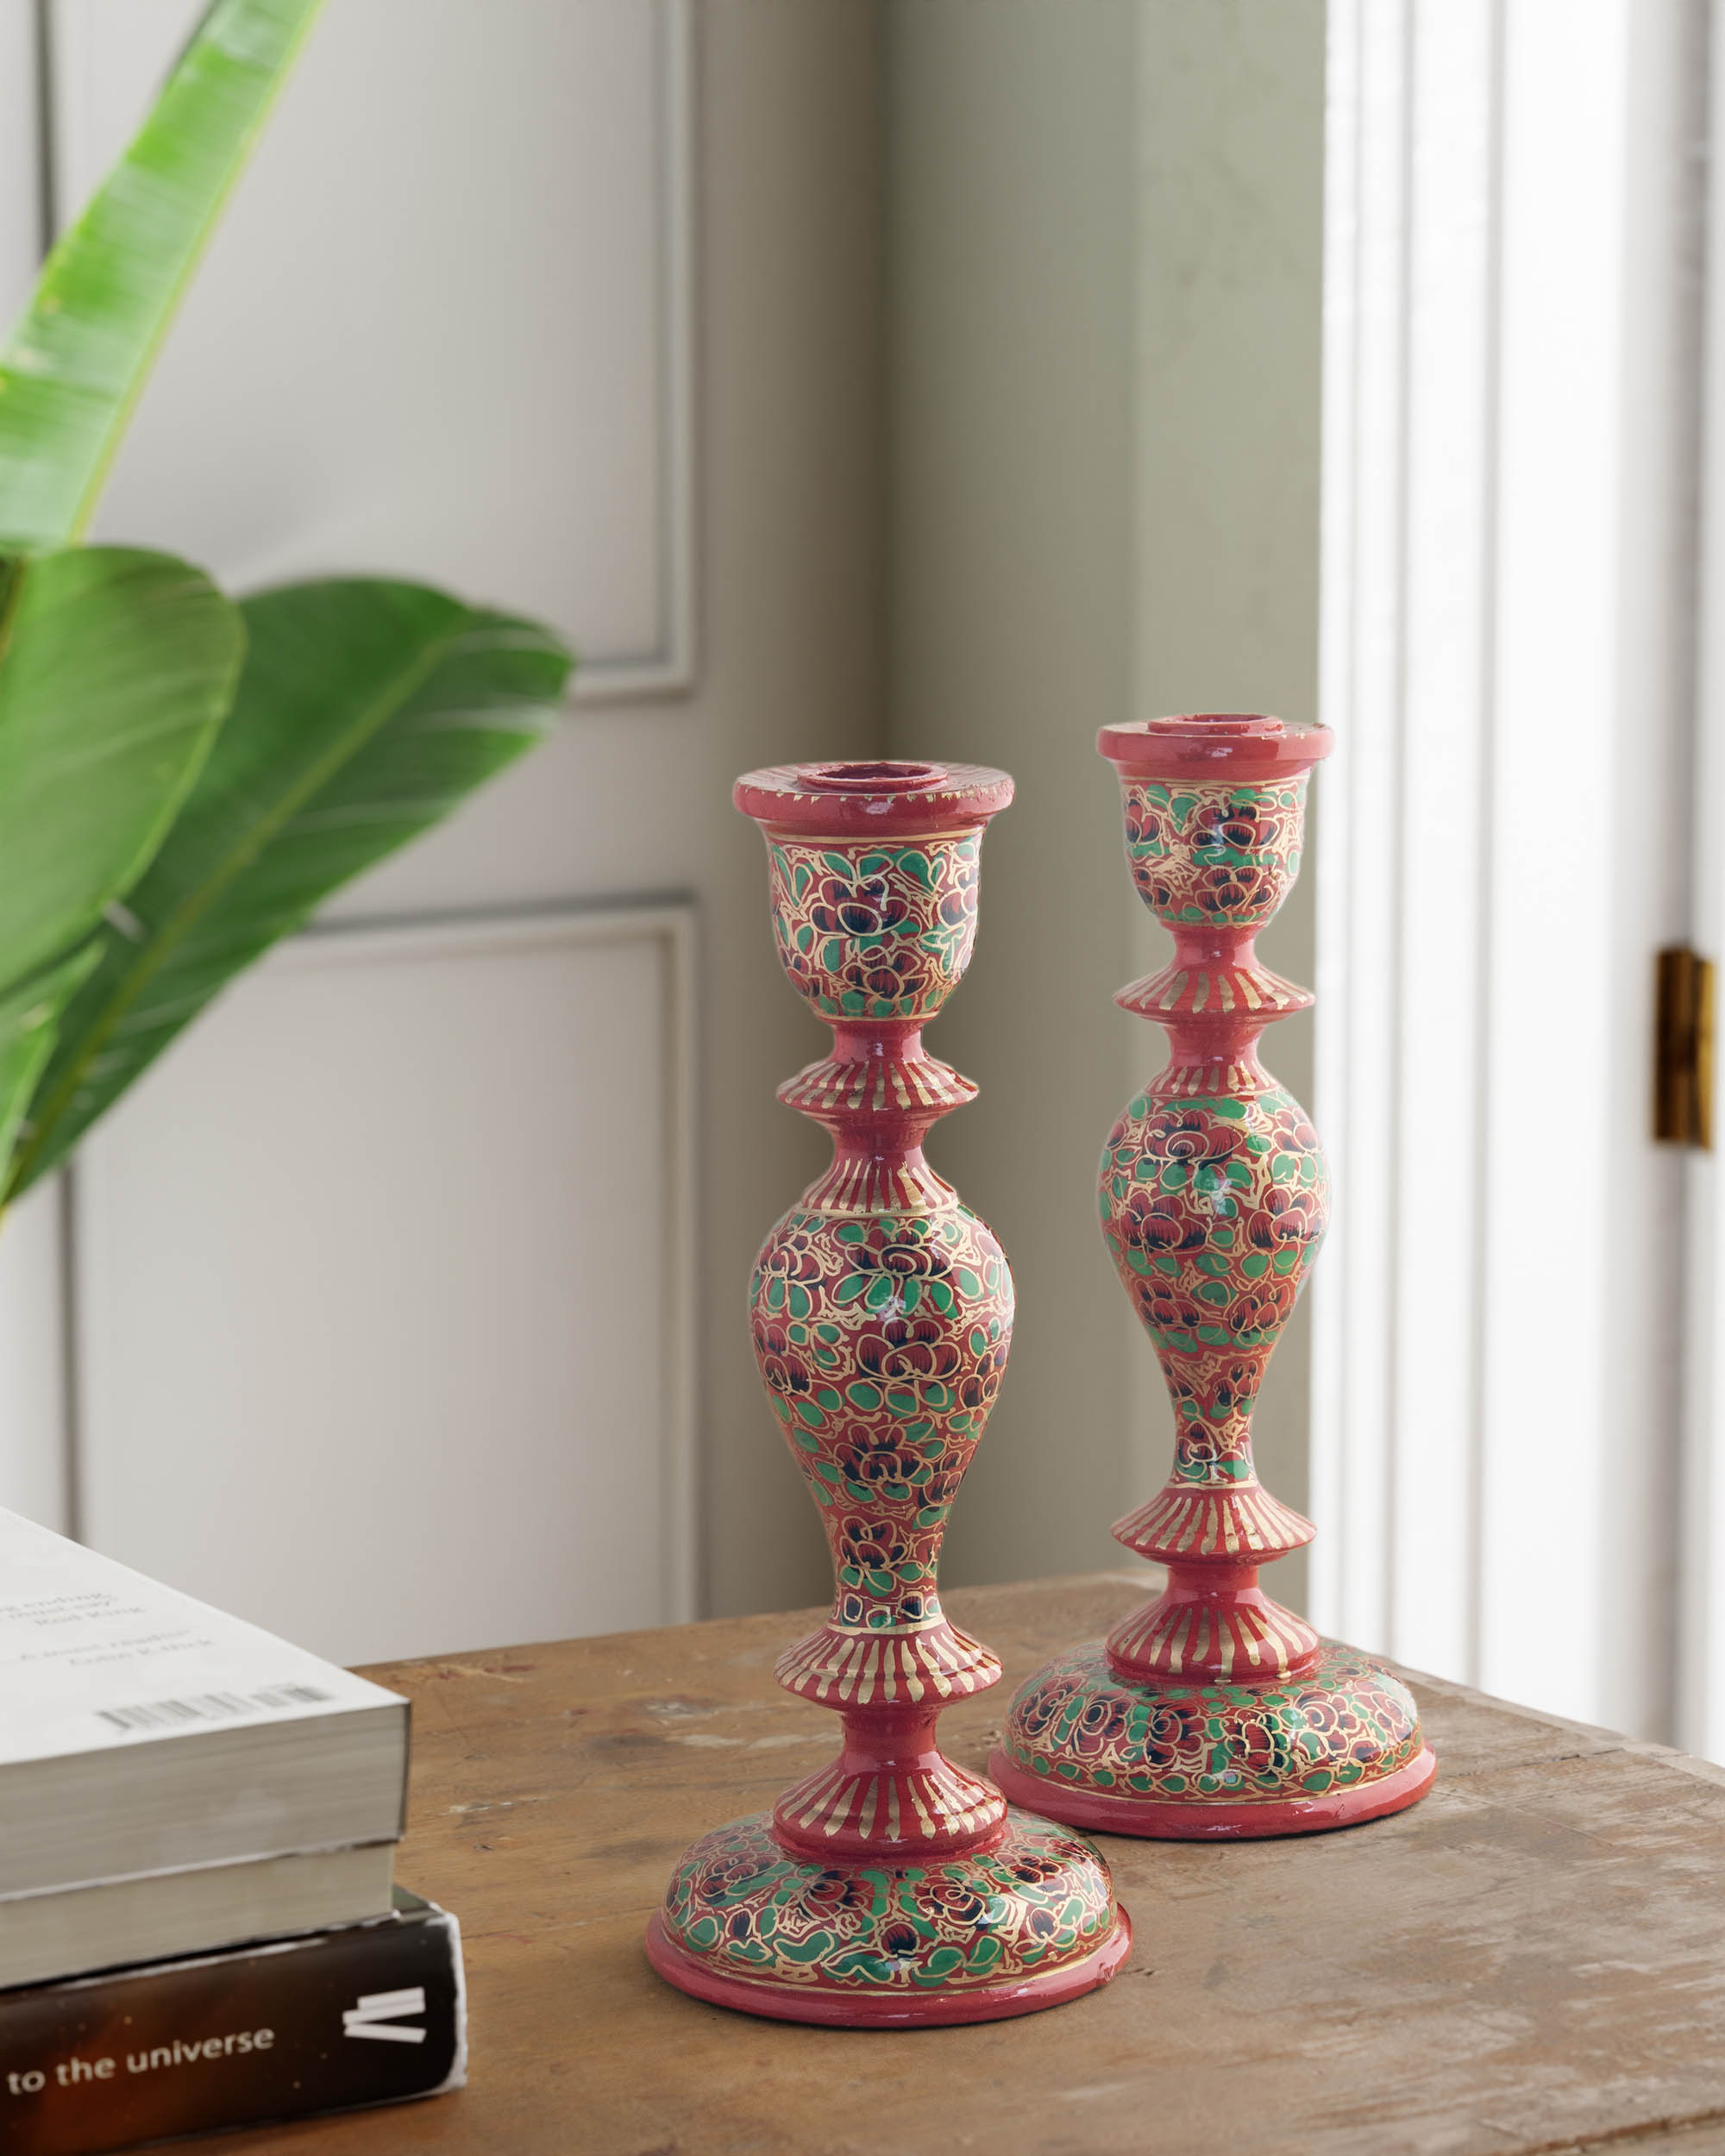 Hand Painted Papier Mache Candle Stands Red, Green - 9.5 x 4